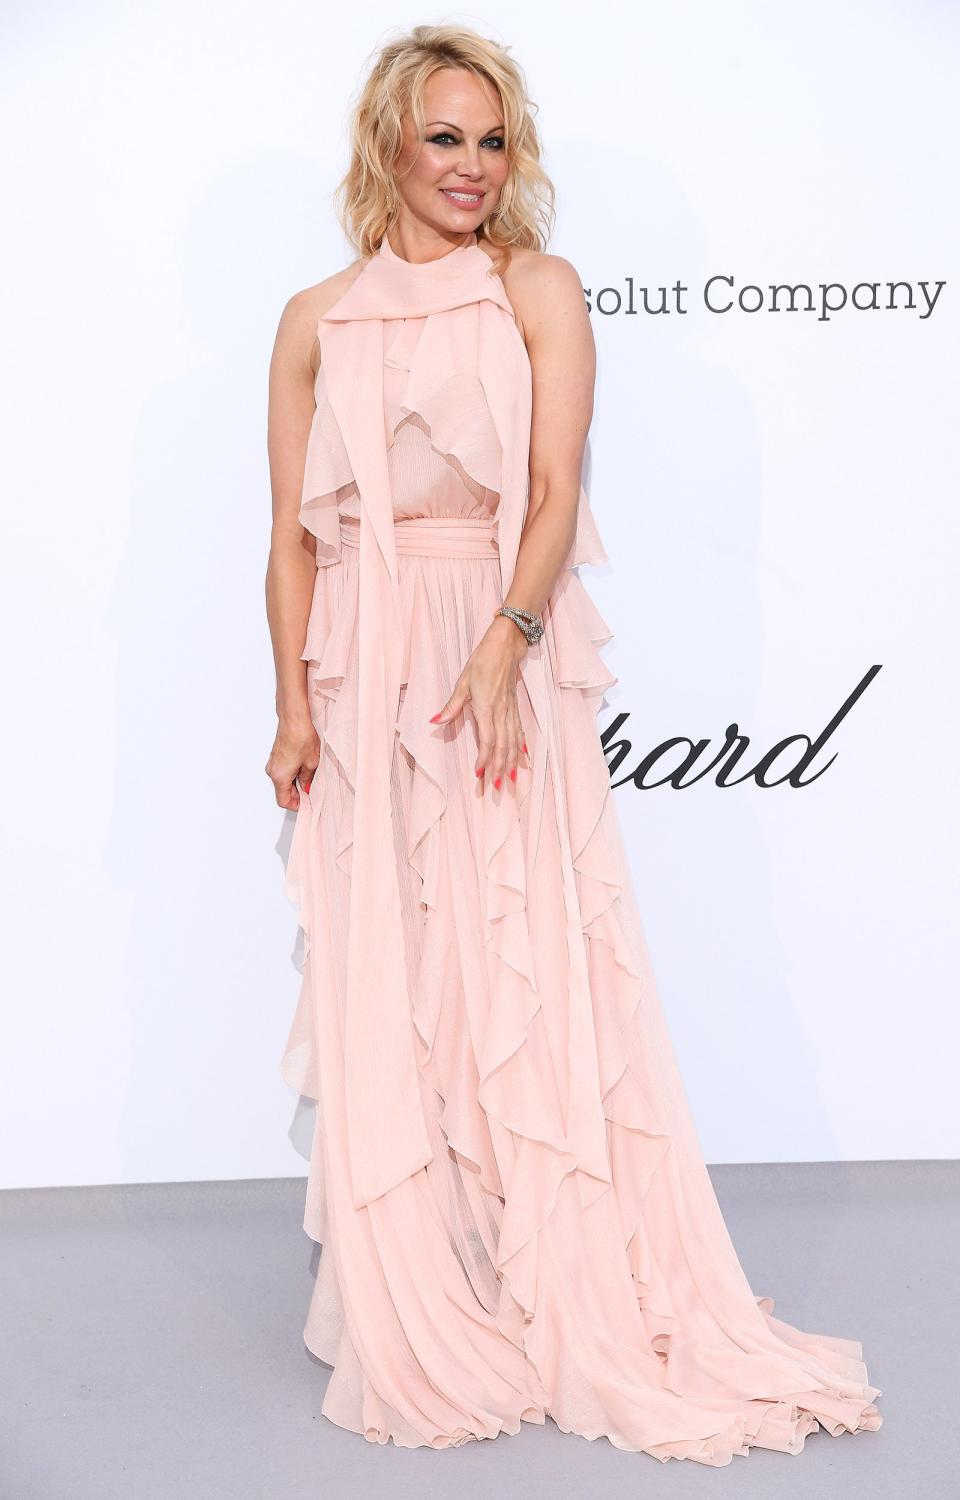 The actress wears a blush-colored pink ruffled gown with Pomellato jewels at the amfAR Gala.